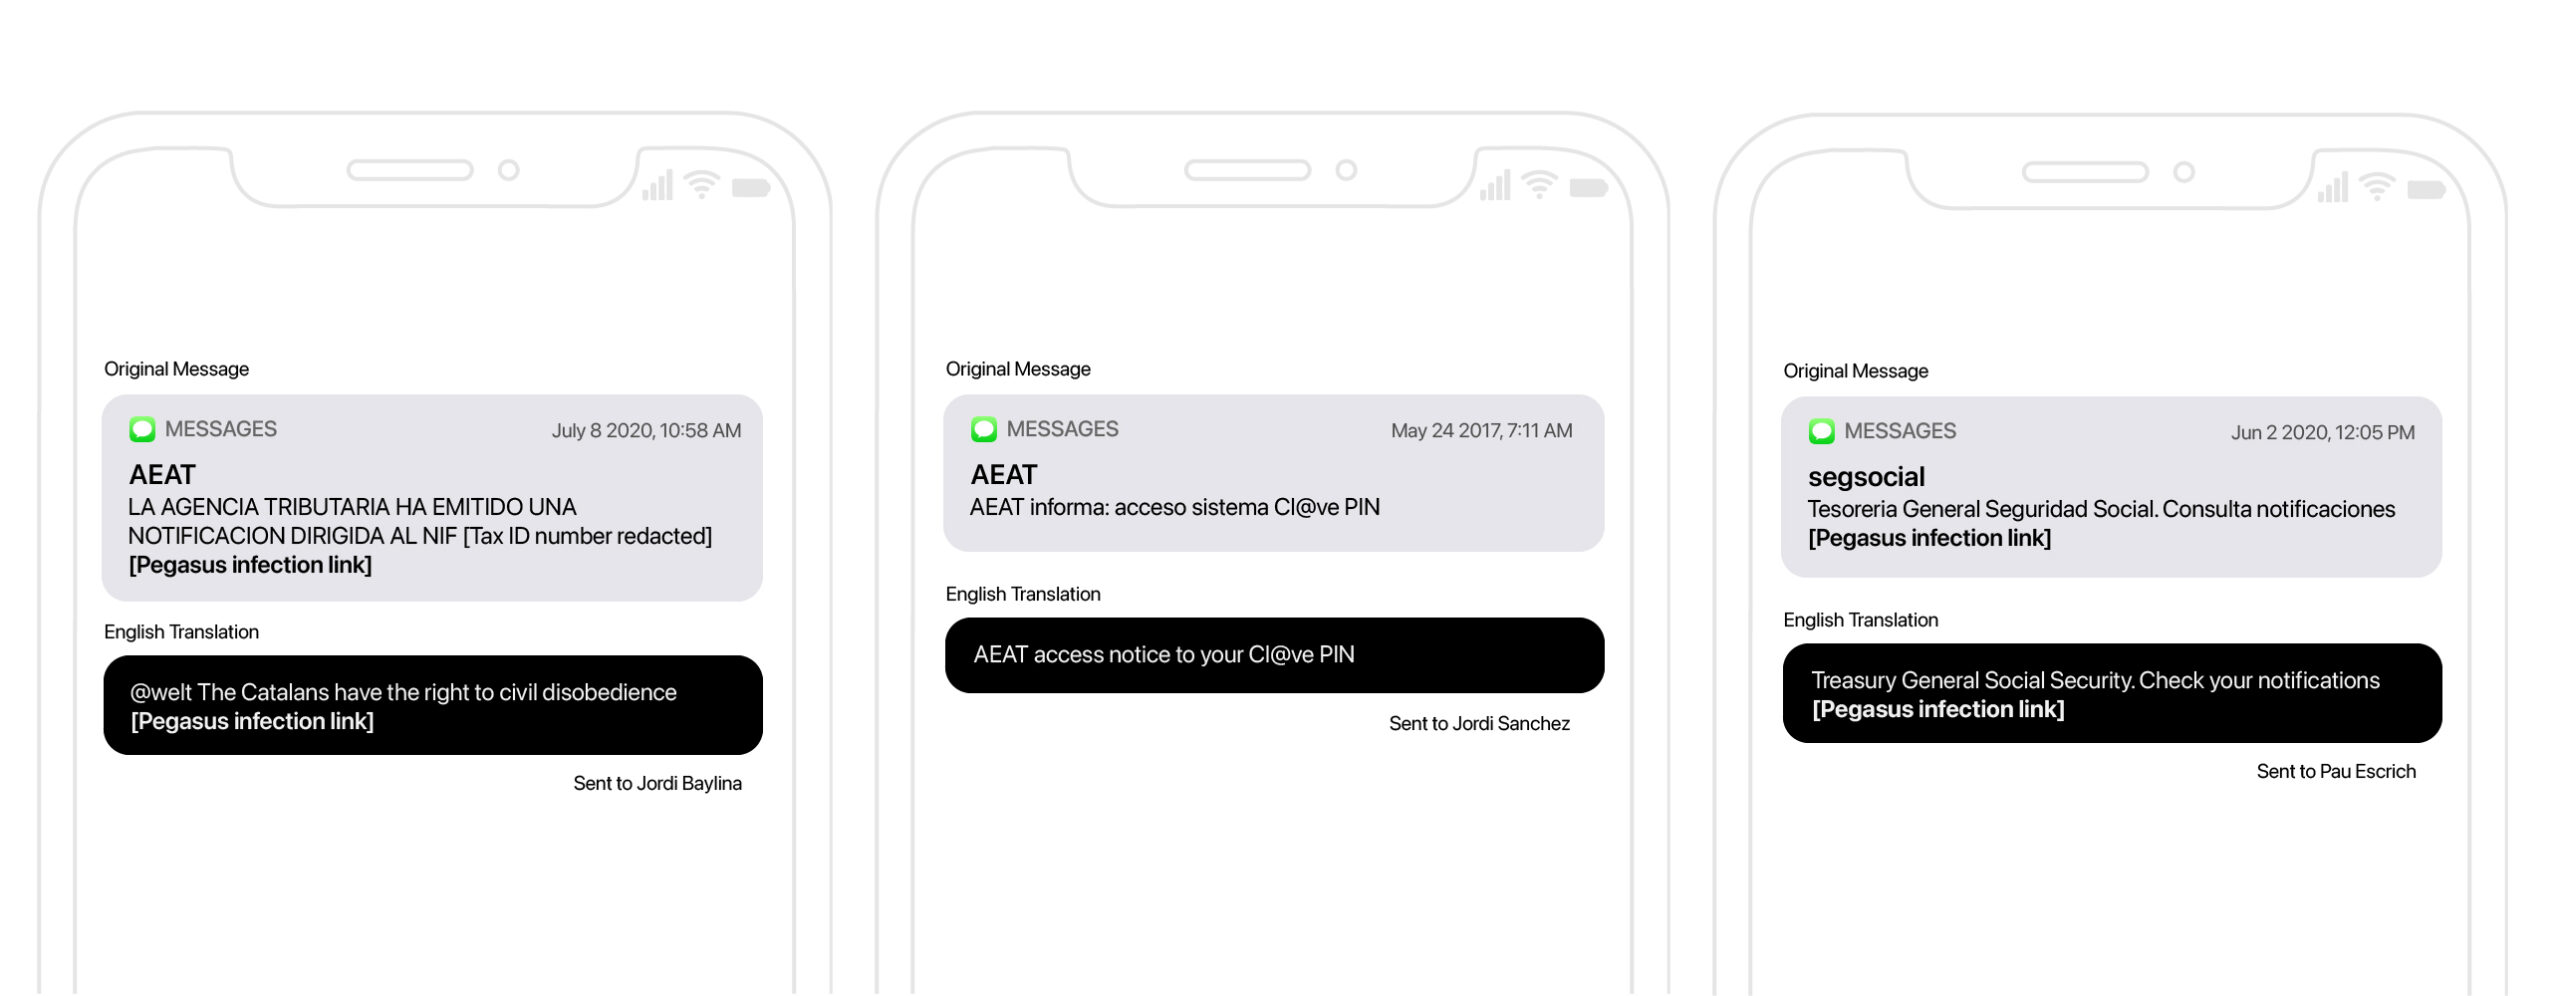 Image of iPhone notifications showing text messages with malicious links attached